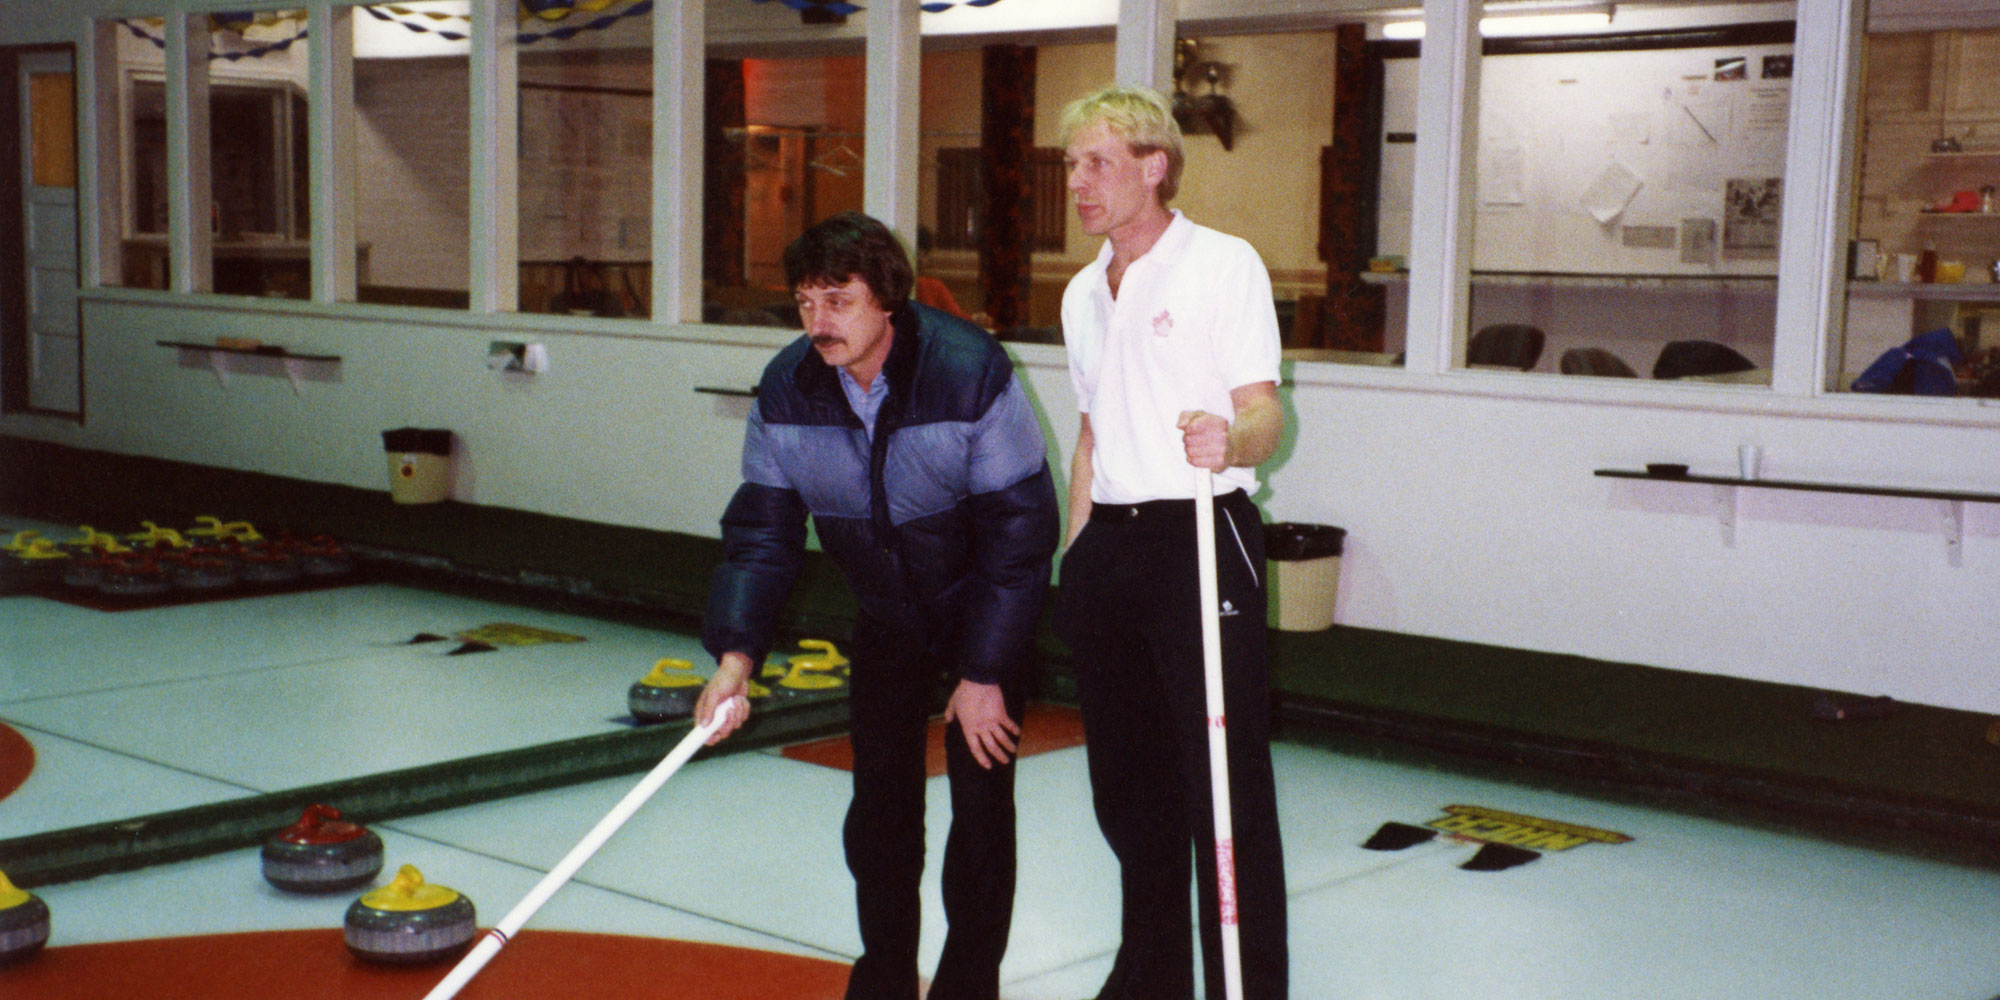 kevin martin and jule owchar curling